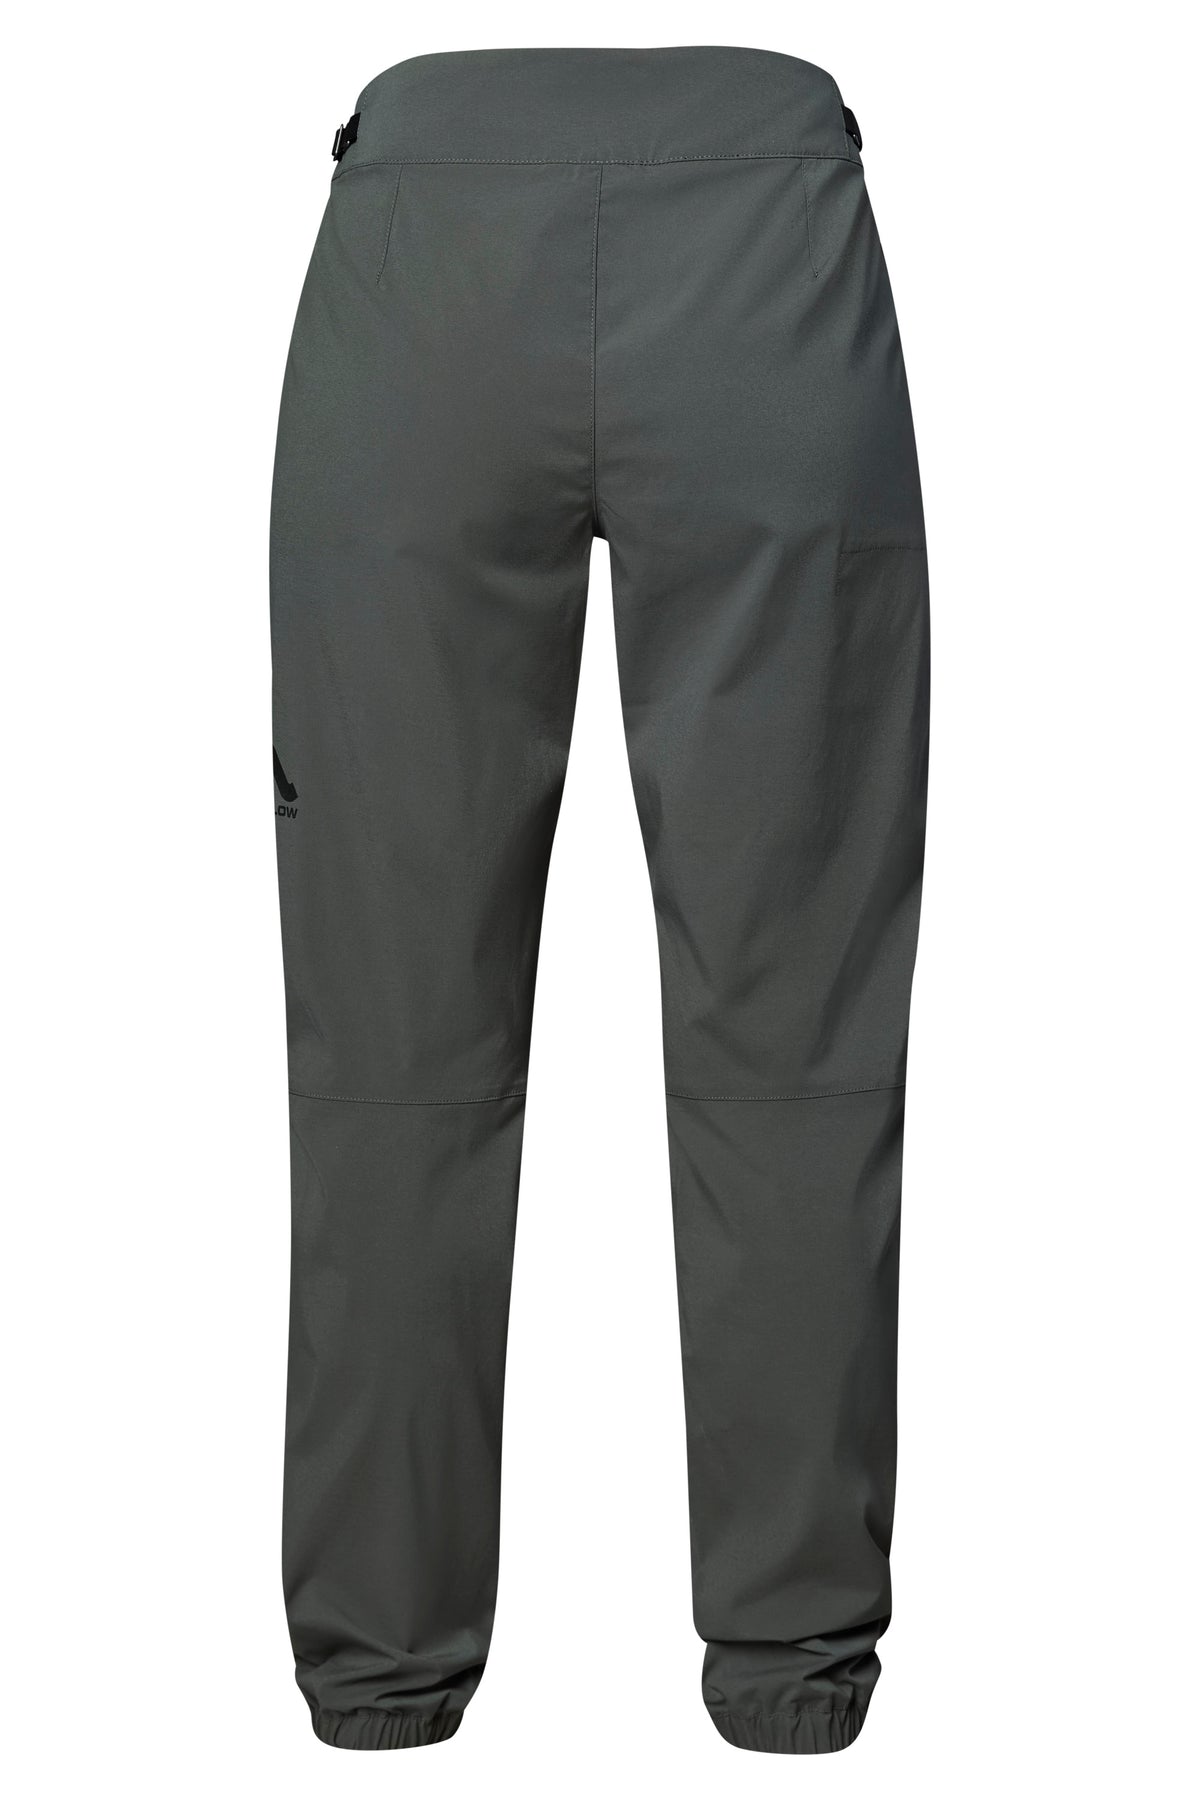 Climbing pants for manlets? : r/climbing